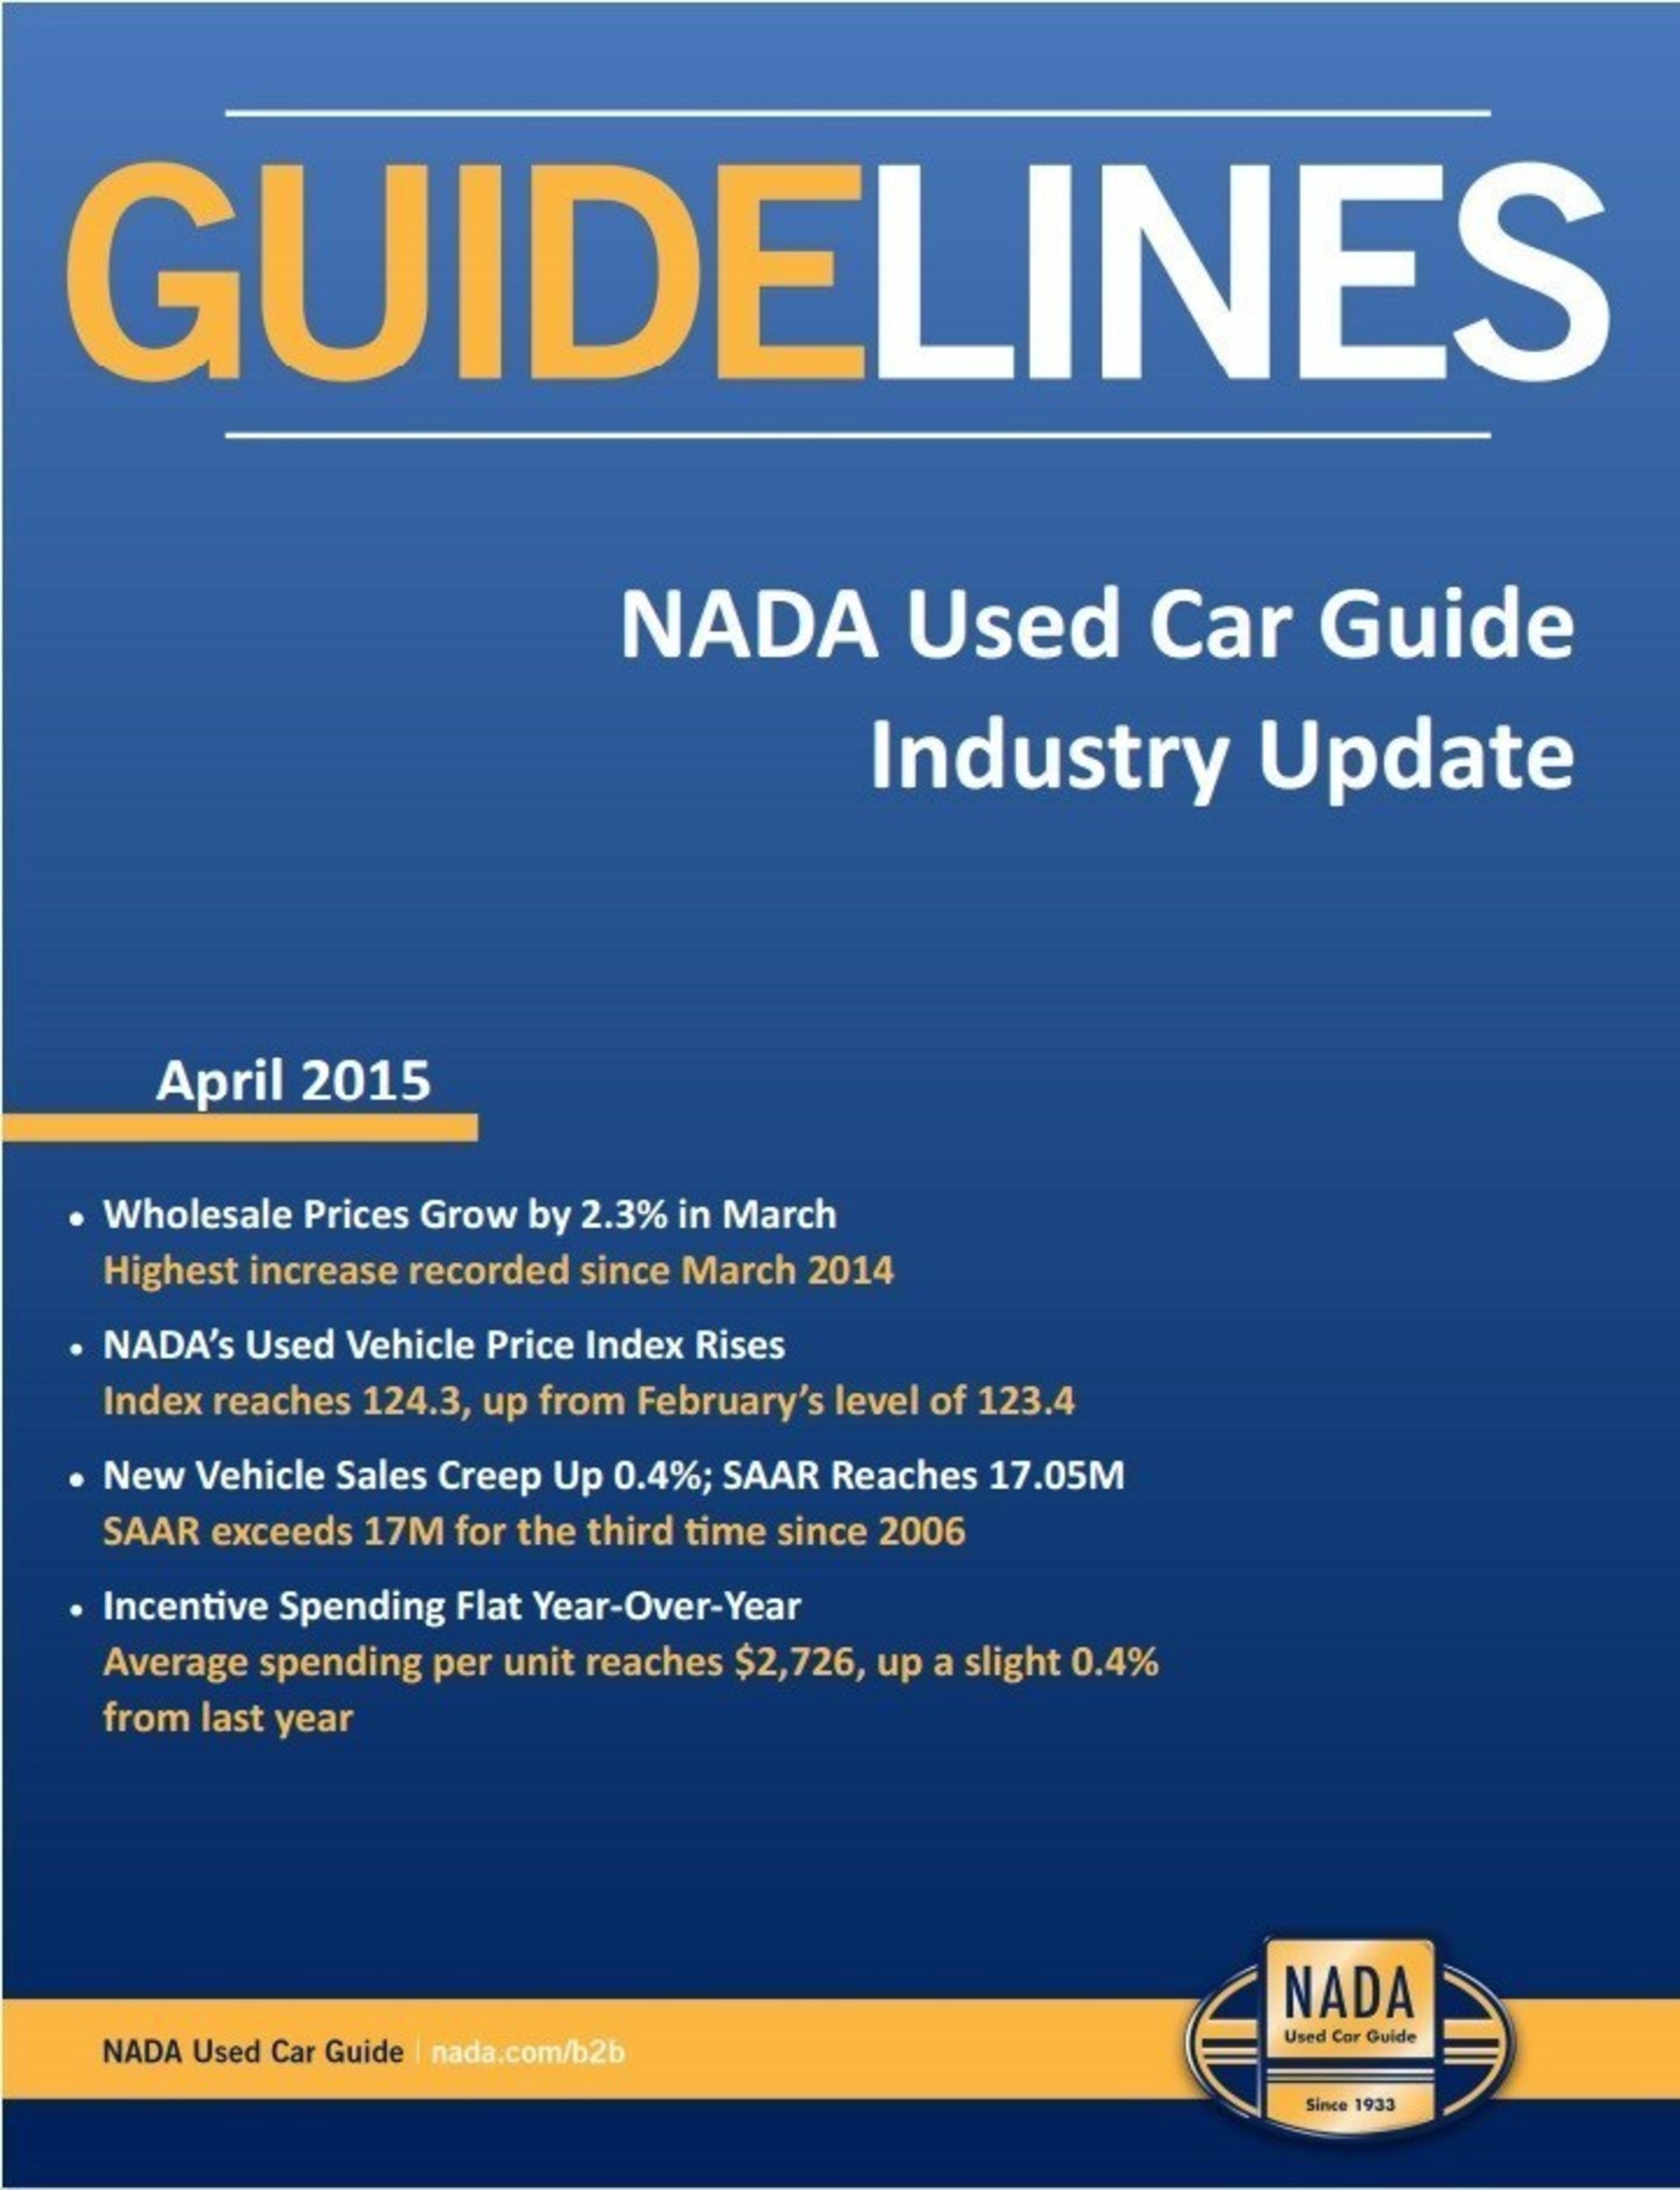 With tax refund checks filling the bank accounts of millions of Americans, analysts at NADA Used Car Guide believe April will continue the upward sales and pricing trends they've observed. Learn more in the April edition of Guidelines.